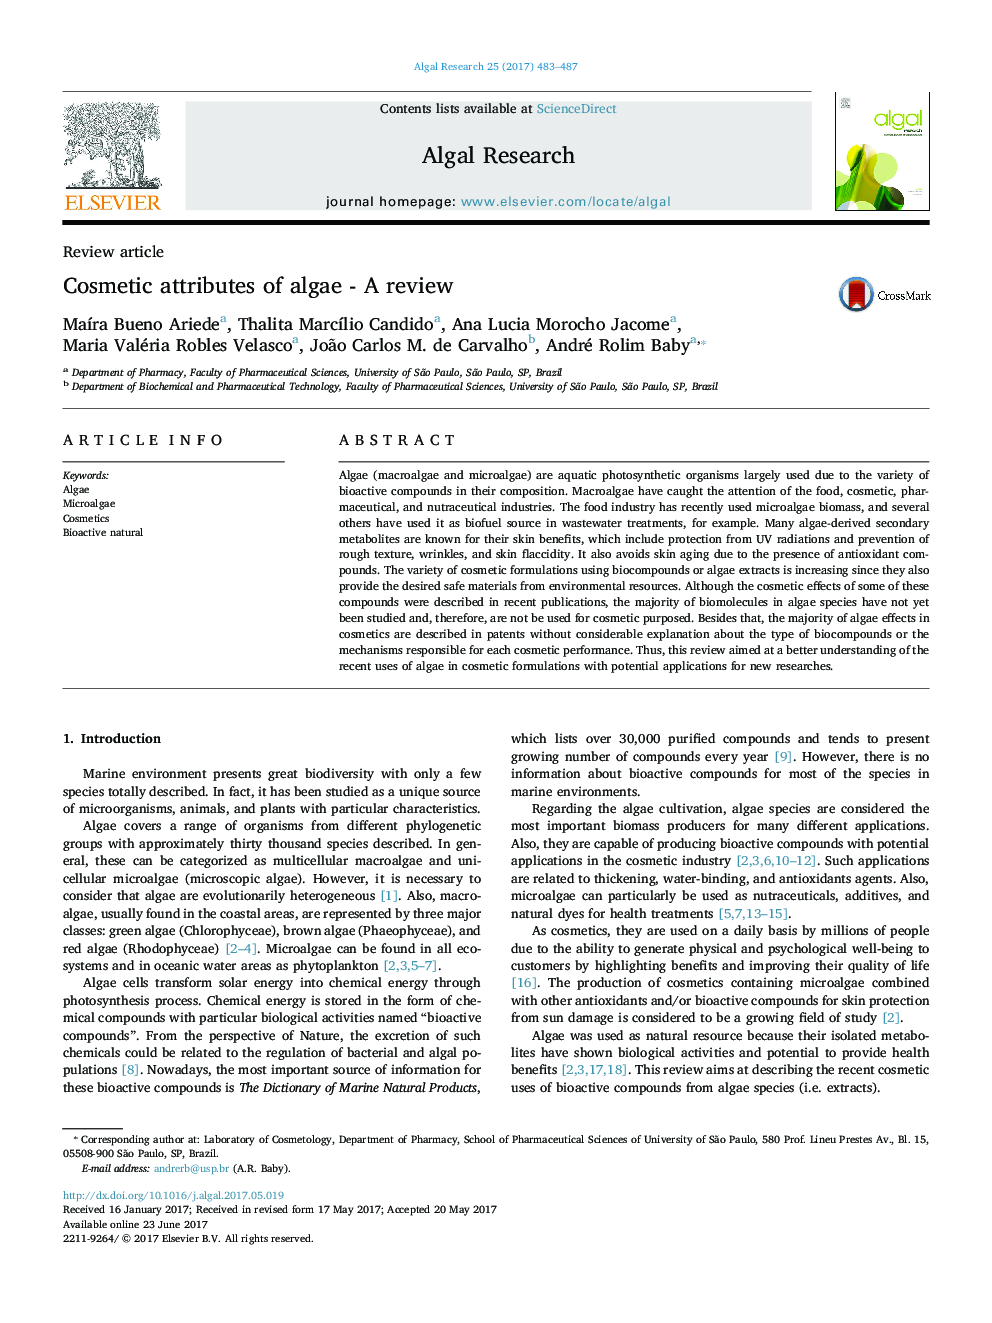 Cosmetic attributes of algae - A review